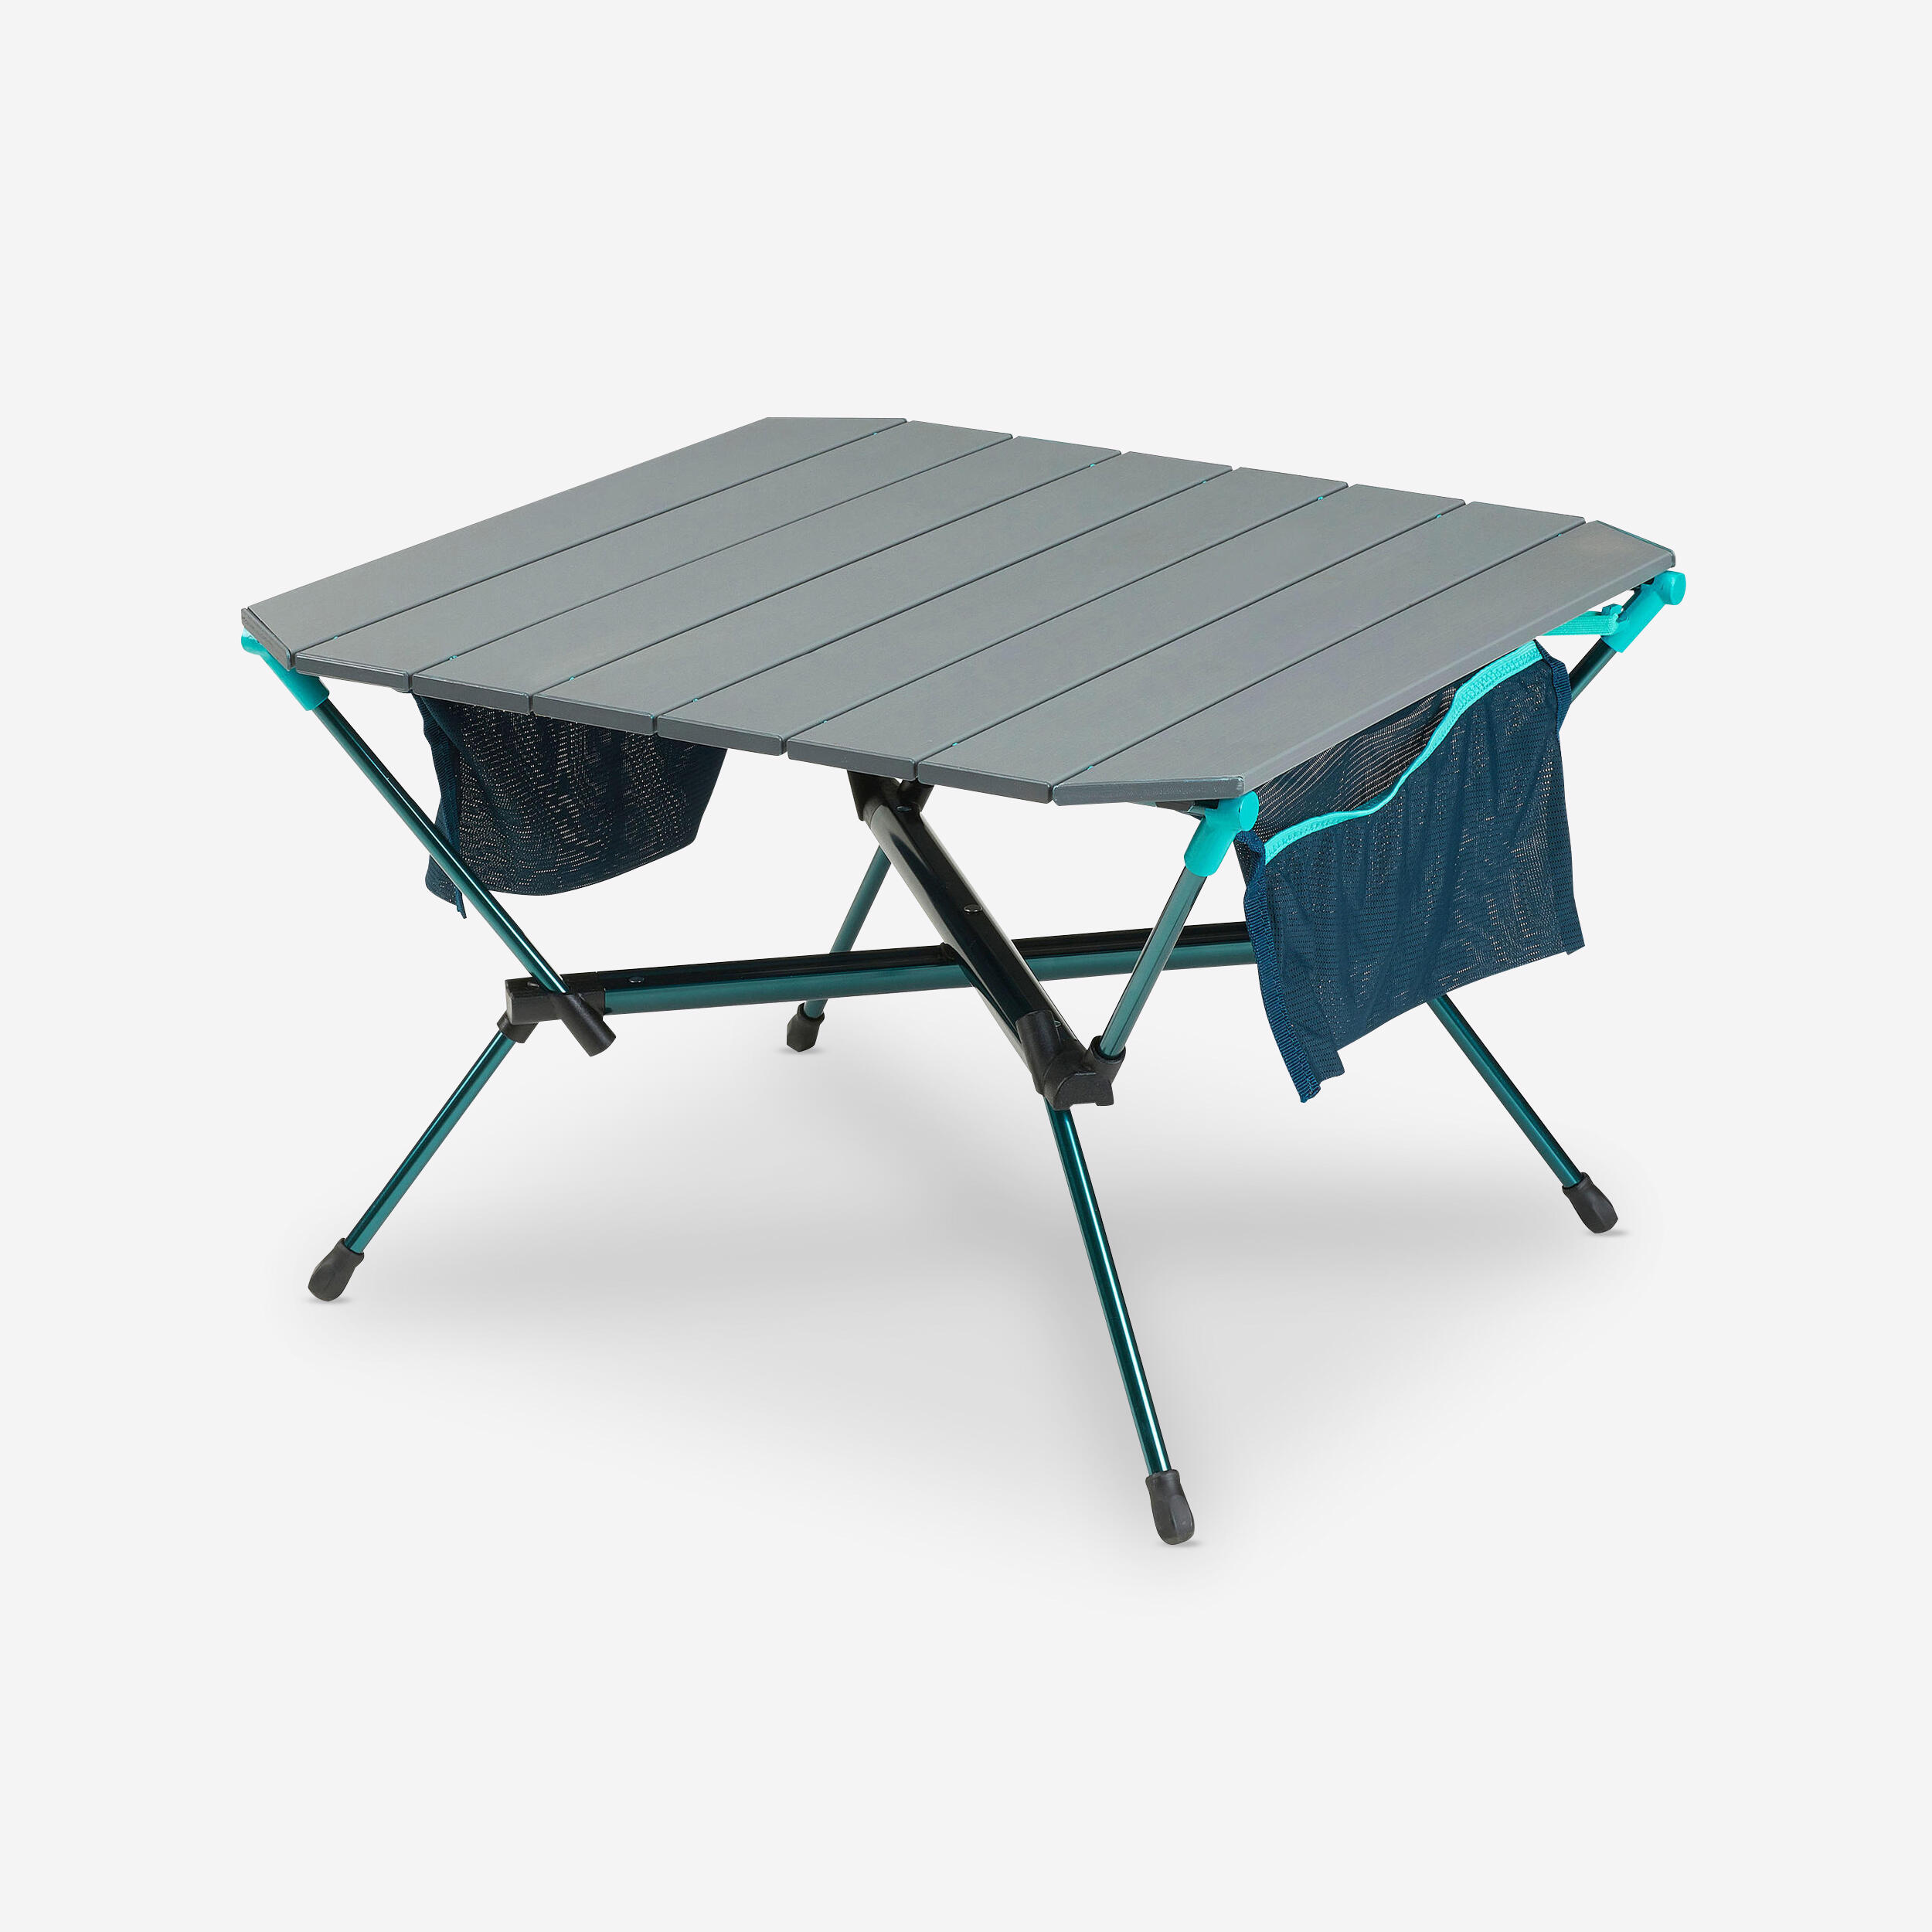 FOLDING CAMPING TABLE - MH500 1/11